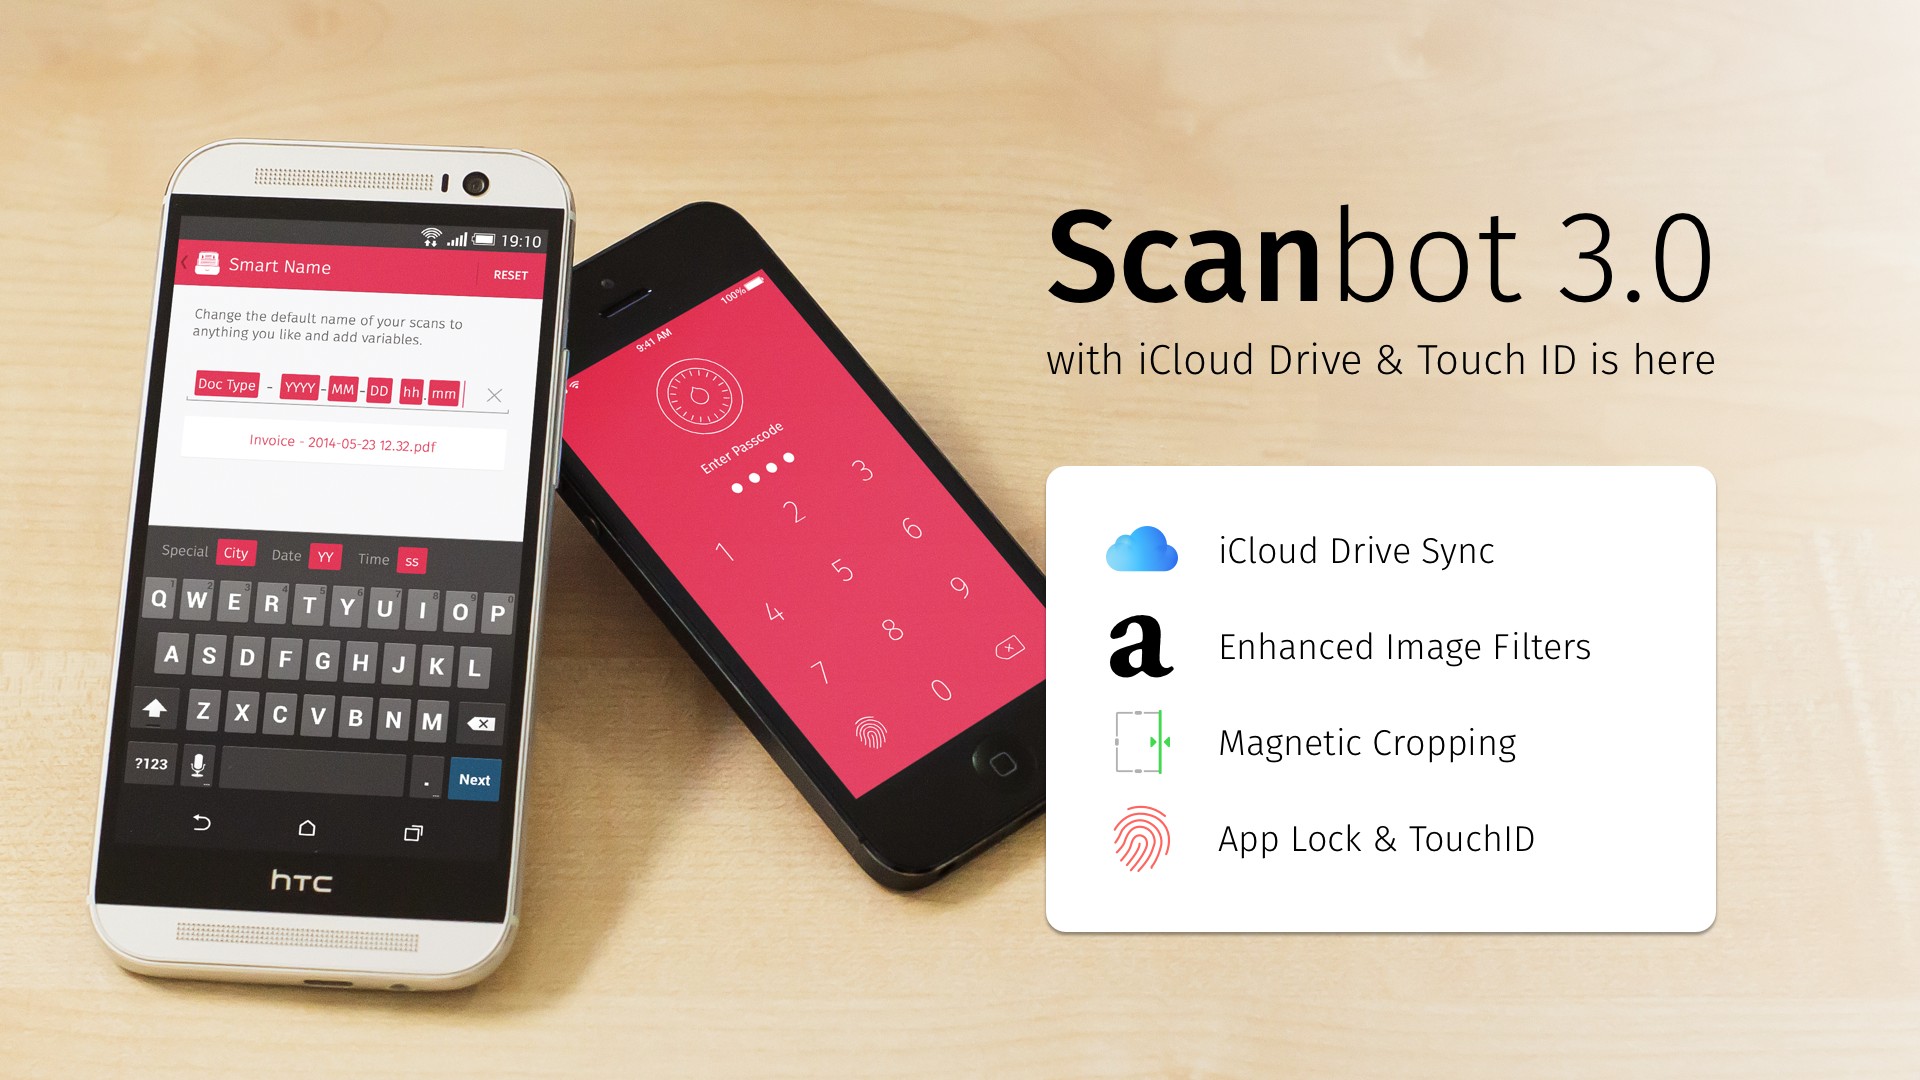 best pdf scanner app for android 2017